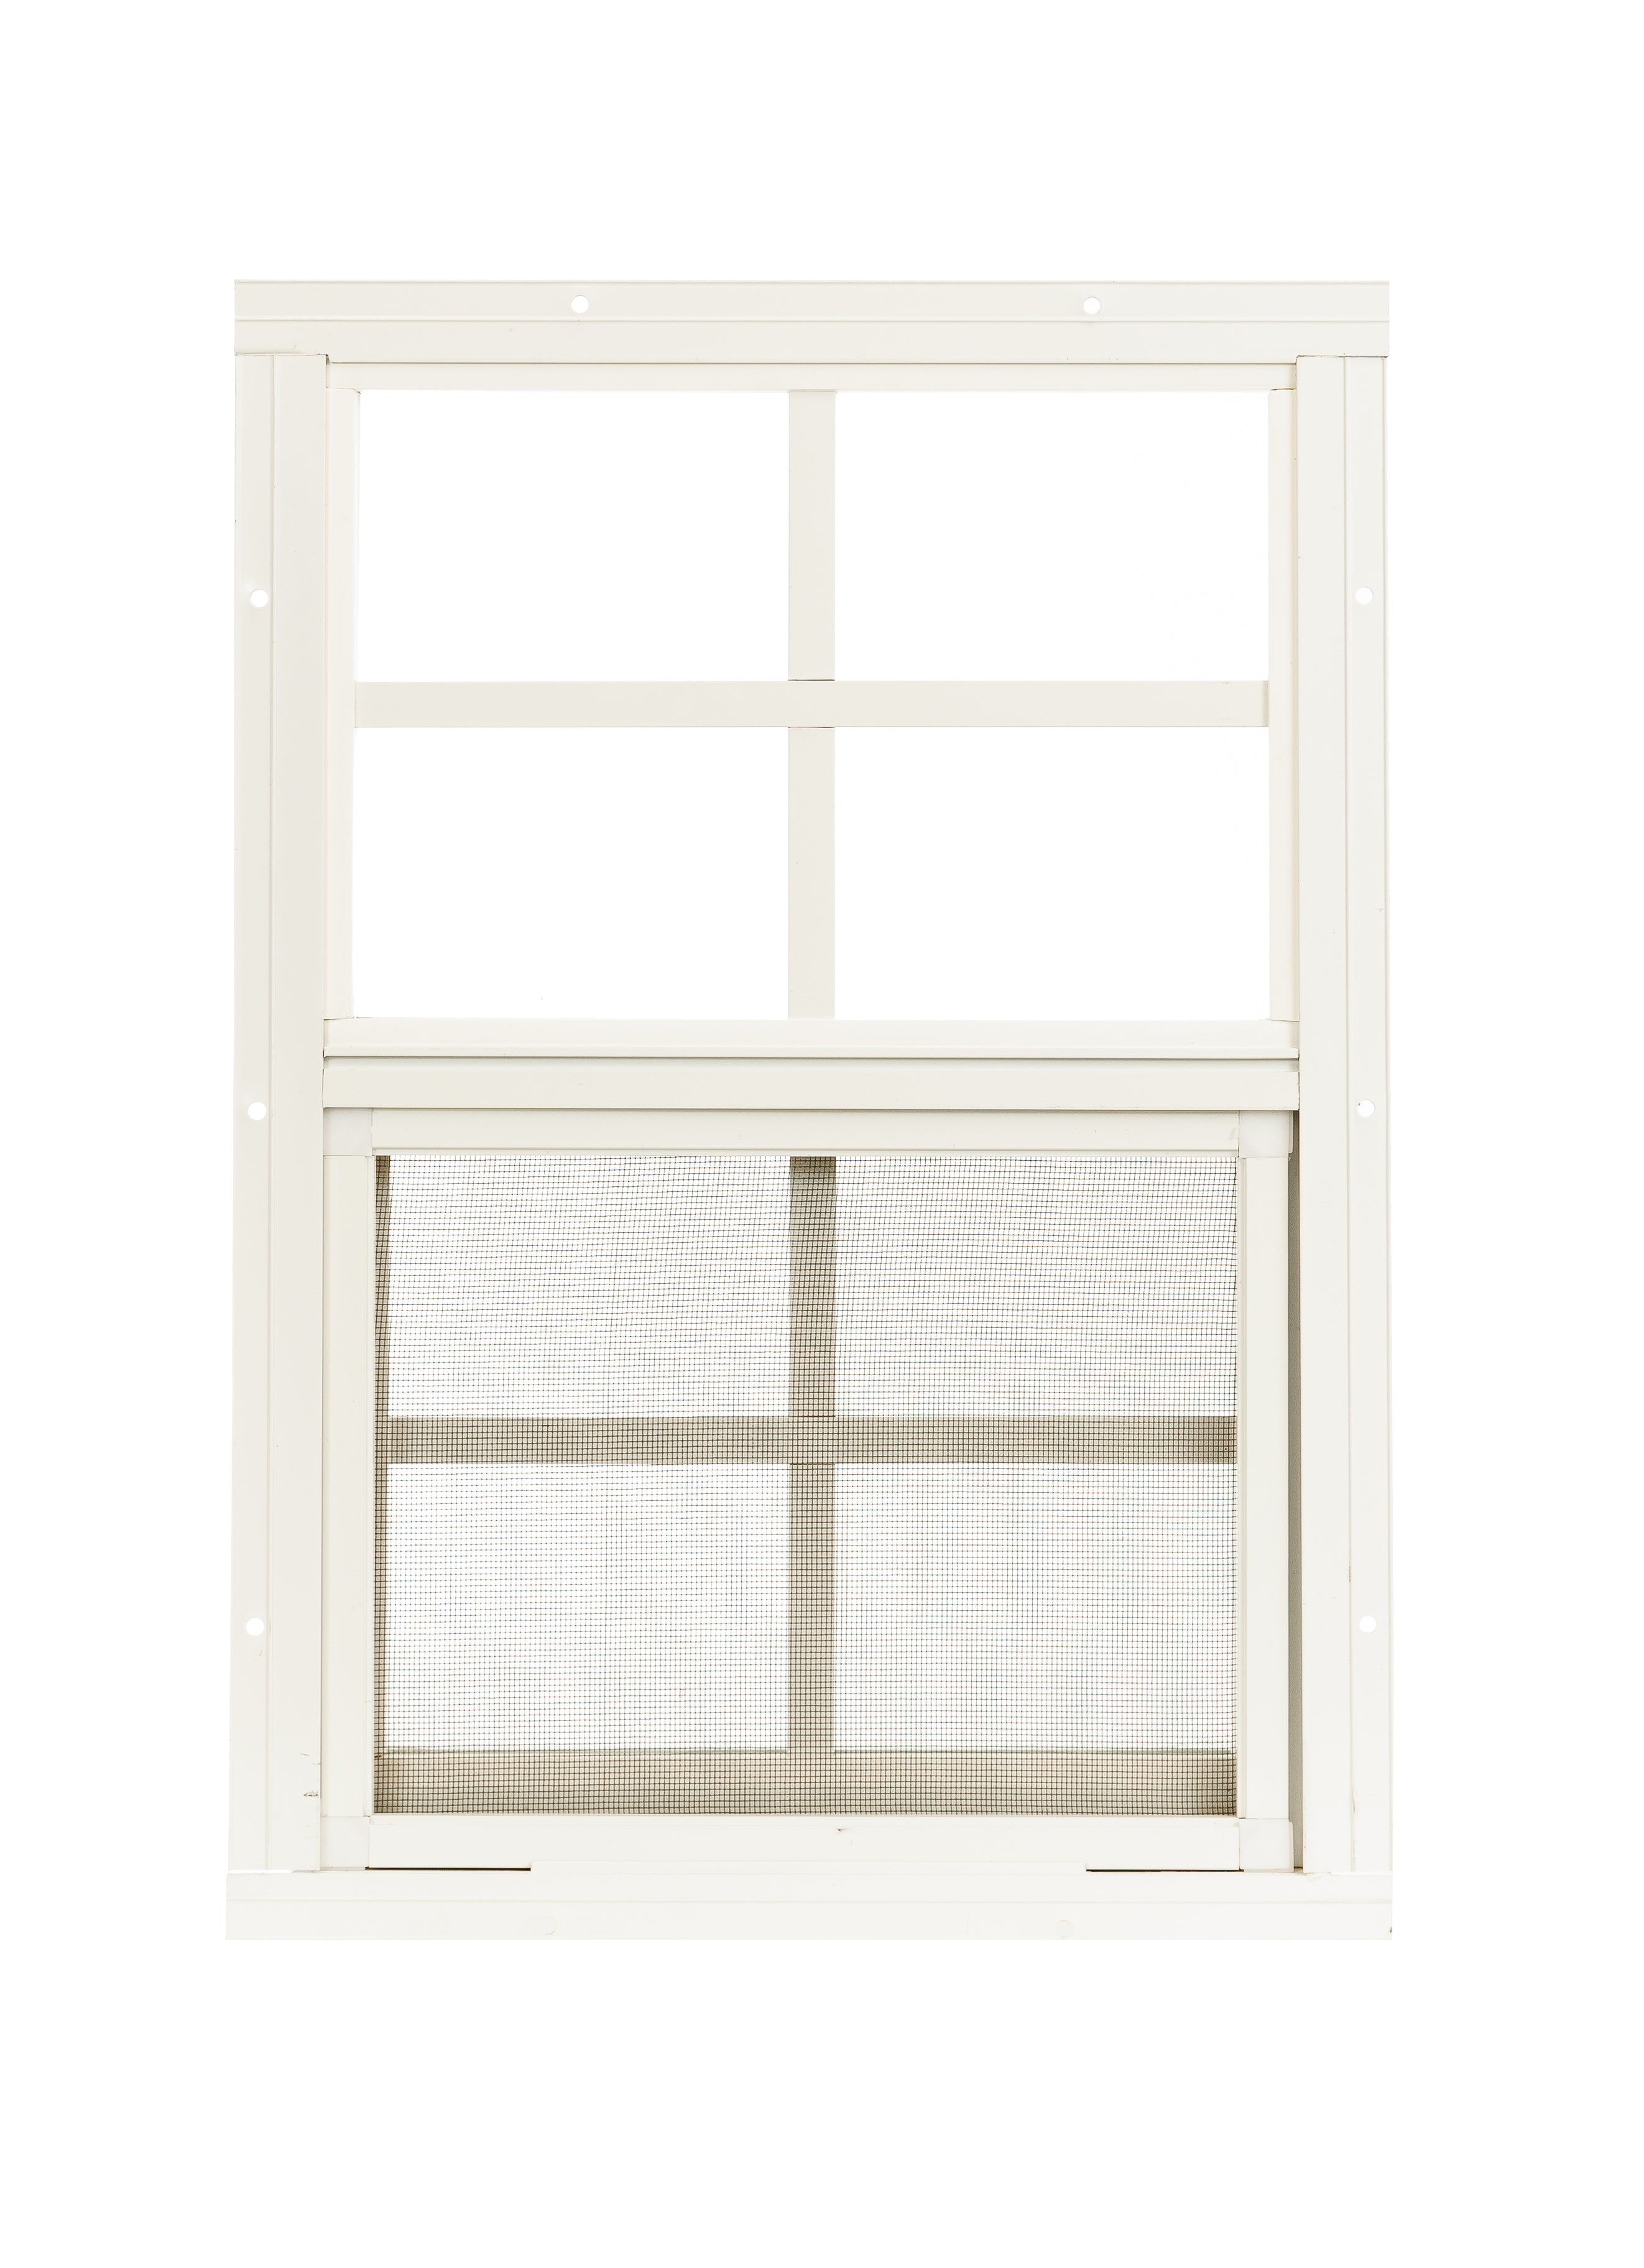 12" W x 18" H Single Hung Flush Mount White Window for Sheds, Playhouses, and MORE 2 pack